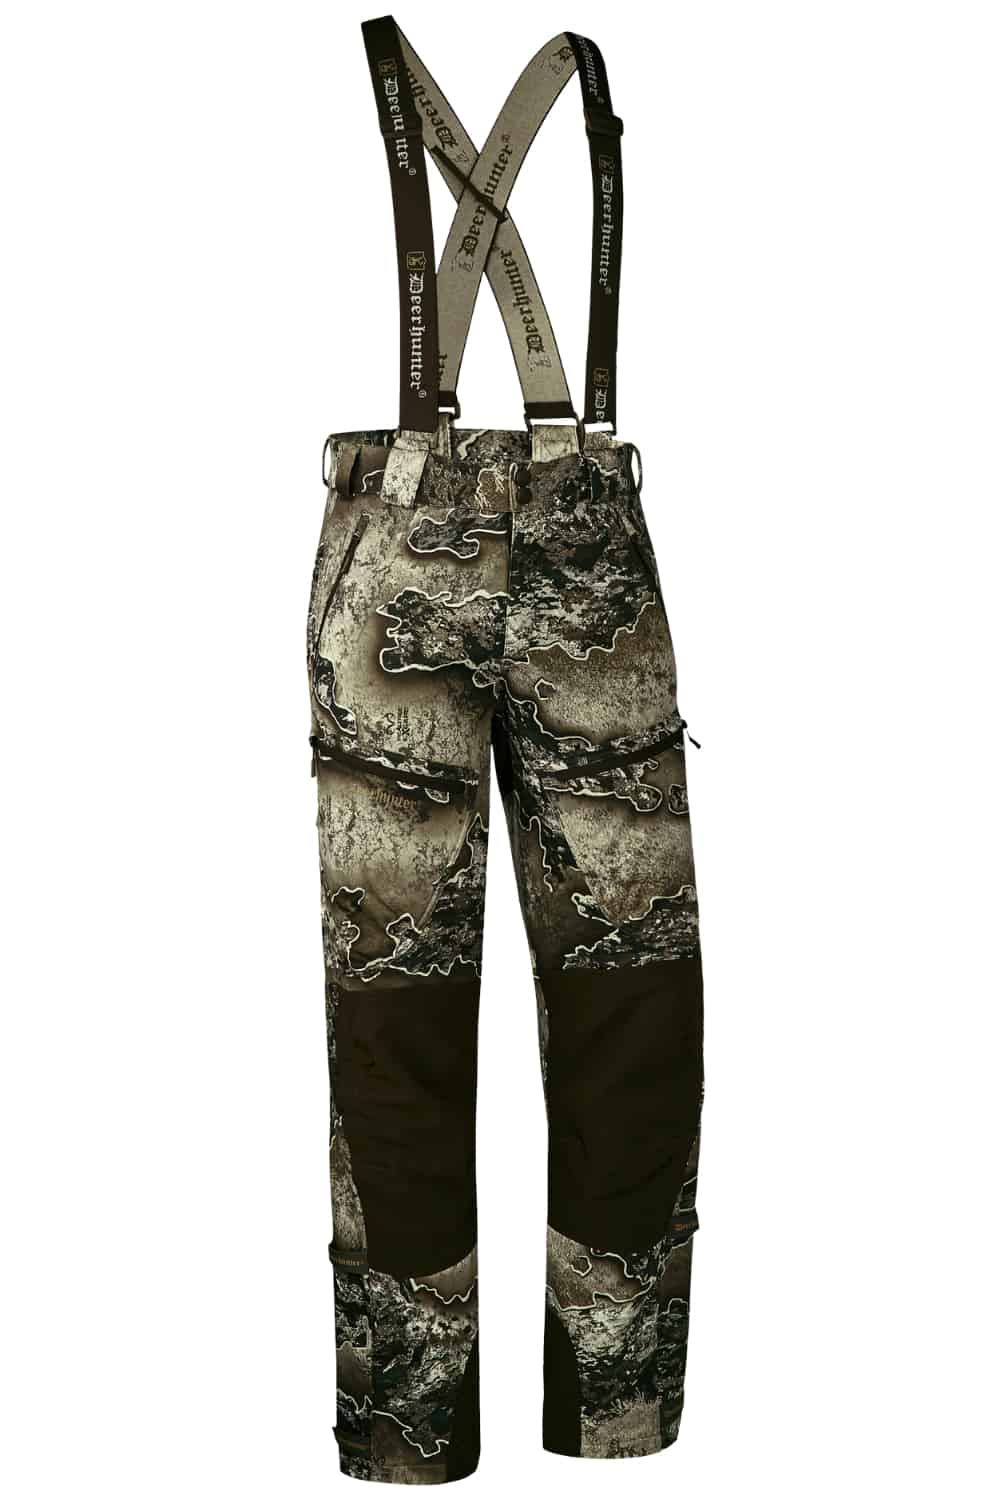 Deerhunter Excape Softshell Trousers in Realtree Excape 